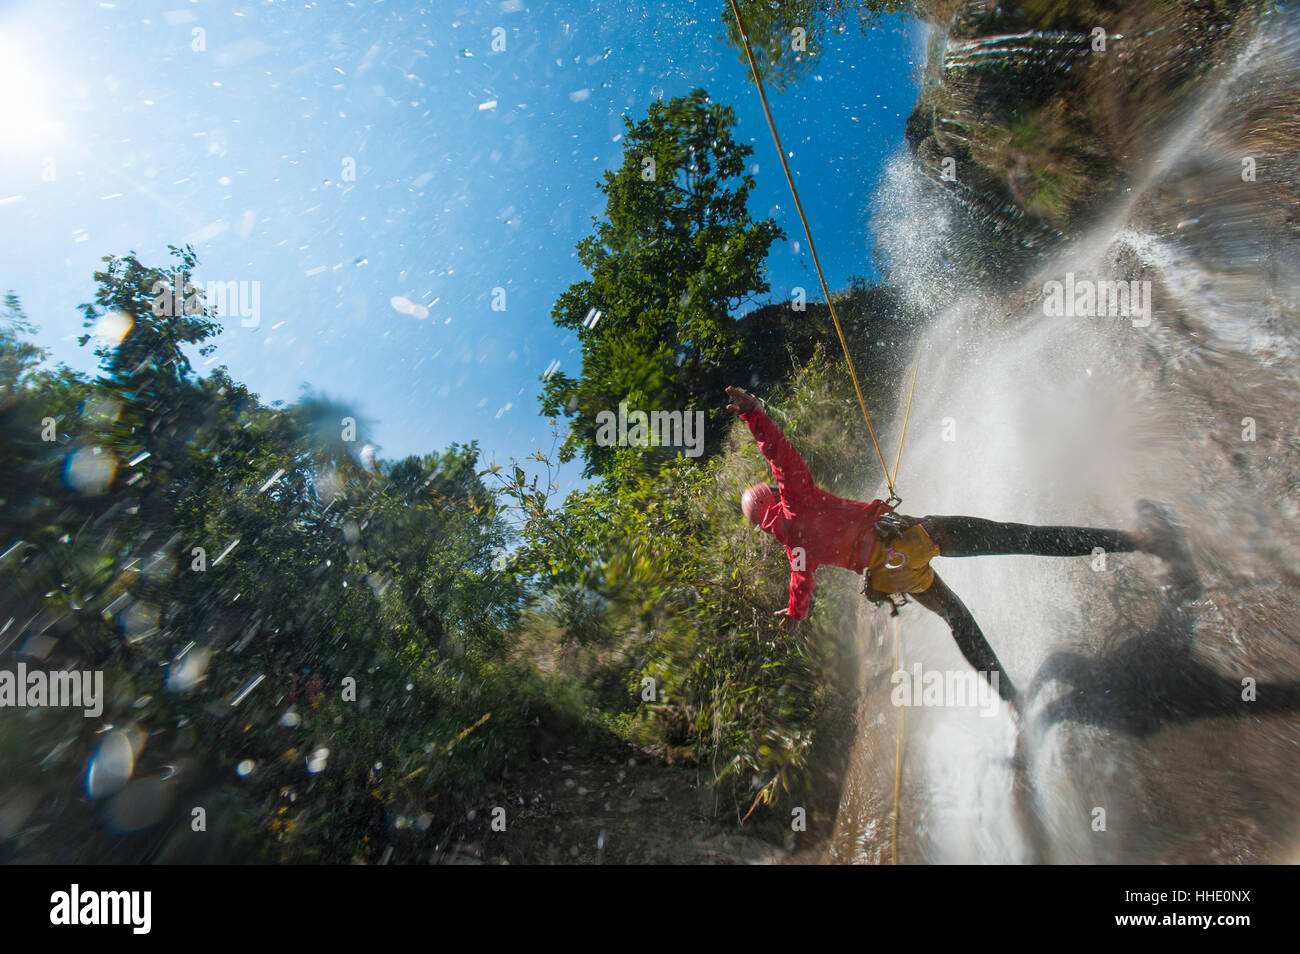 A man pauses to hold his arms in the falling water while canyoning in Nepal Stock Photo